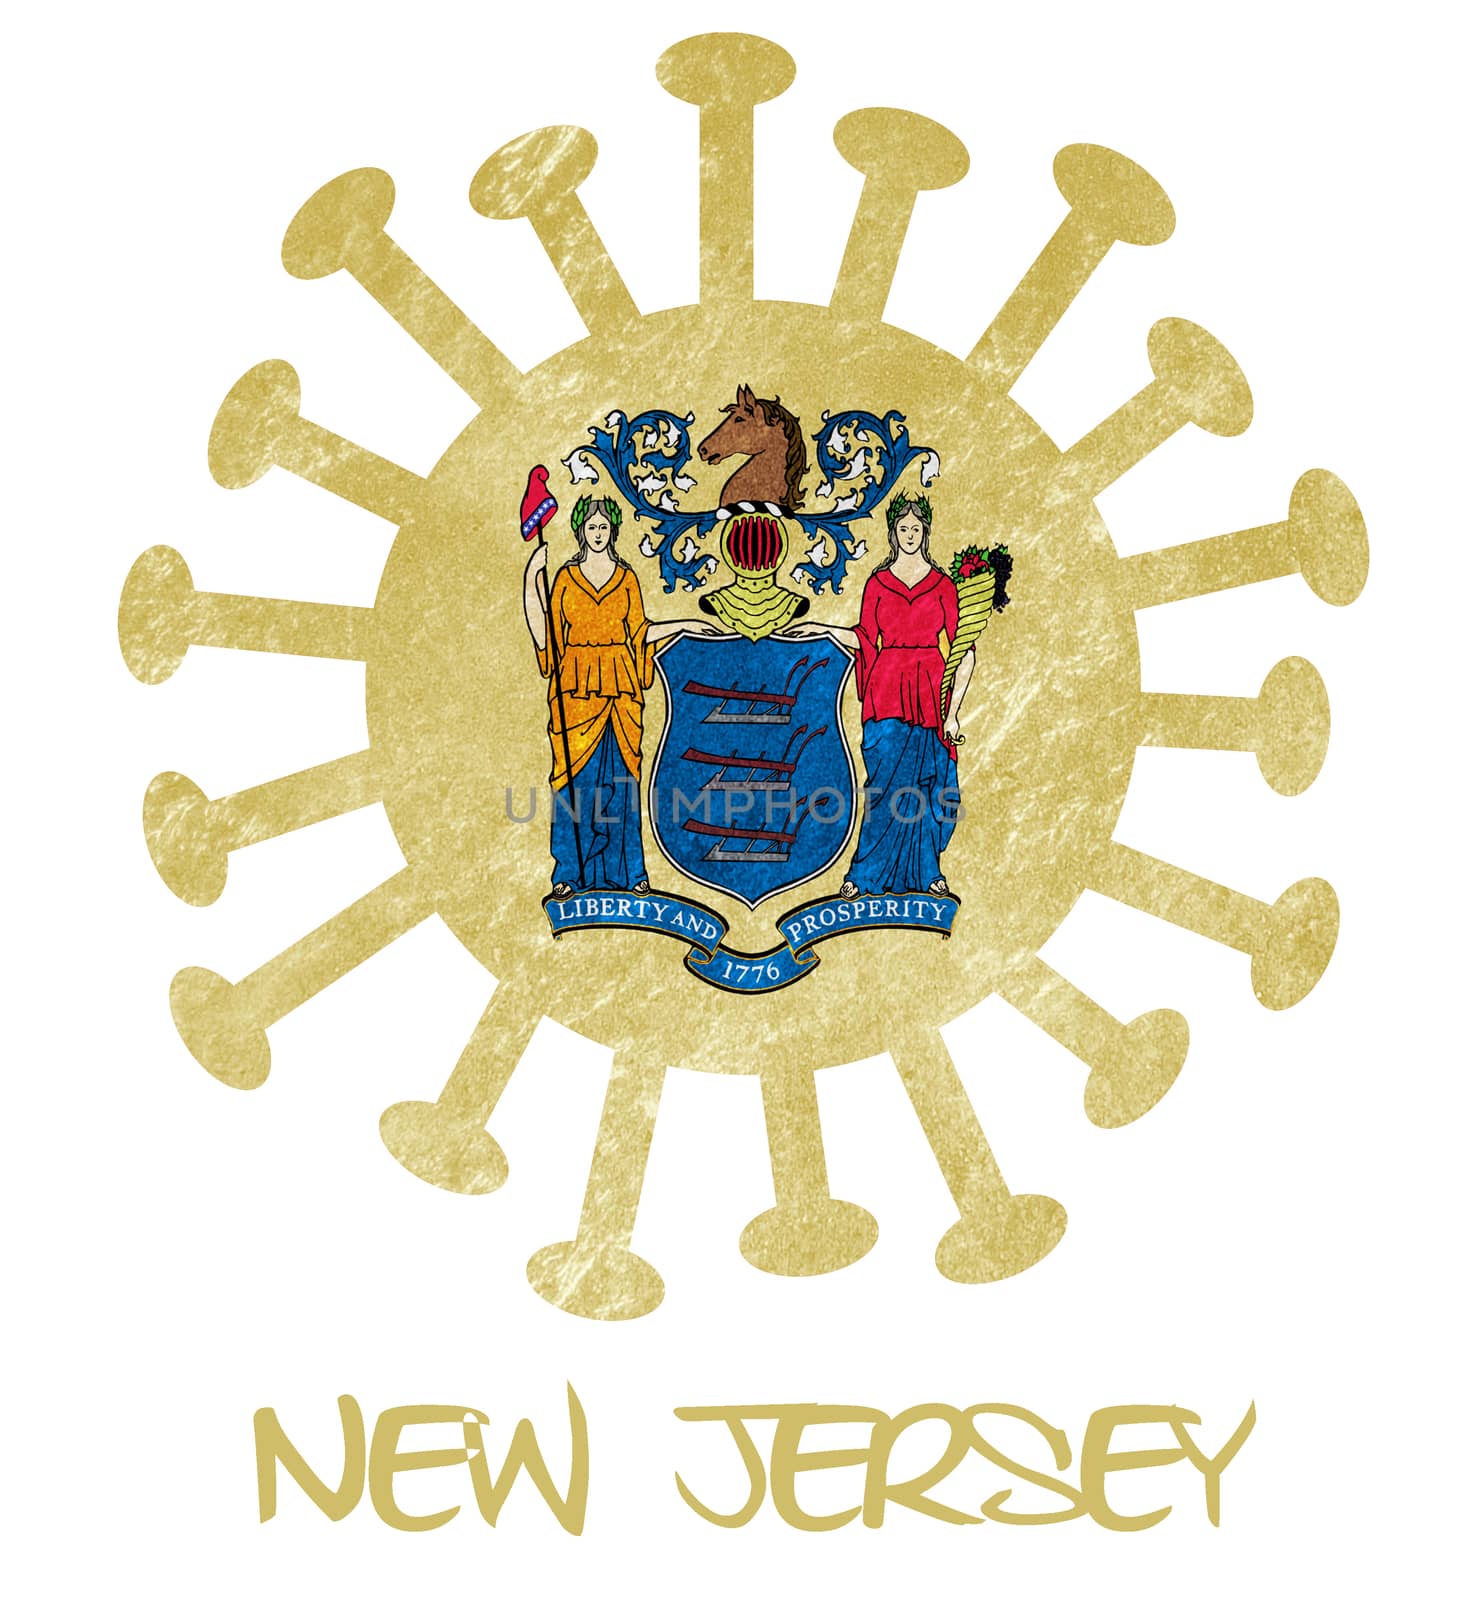 State flag of New Jersey with corona virus or bacteria - Isolated on white